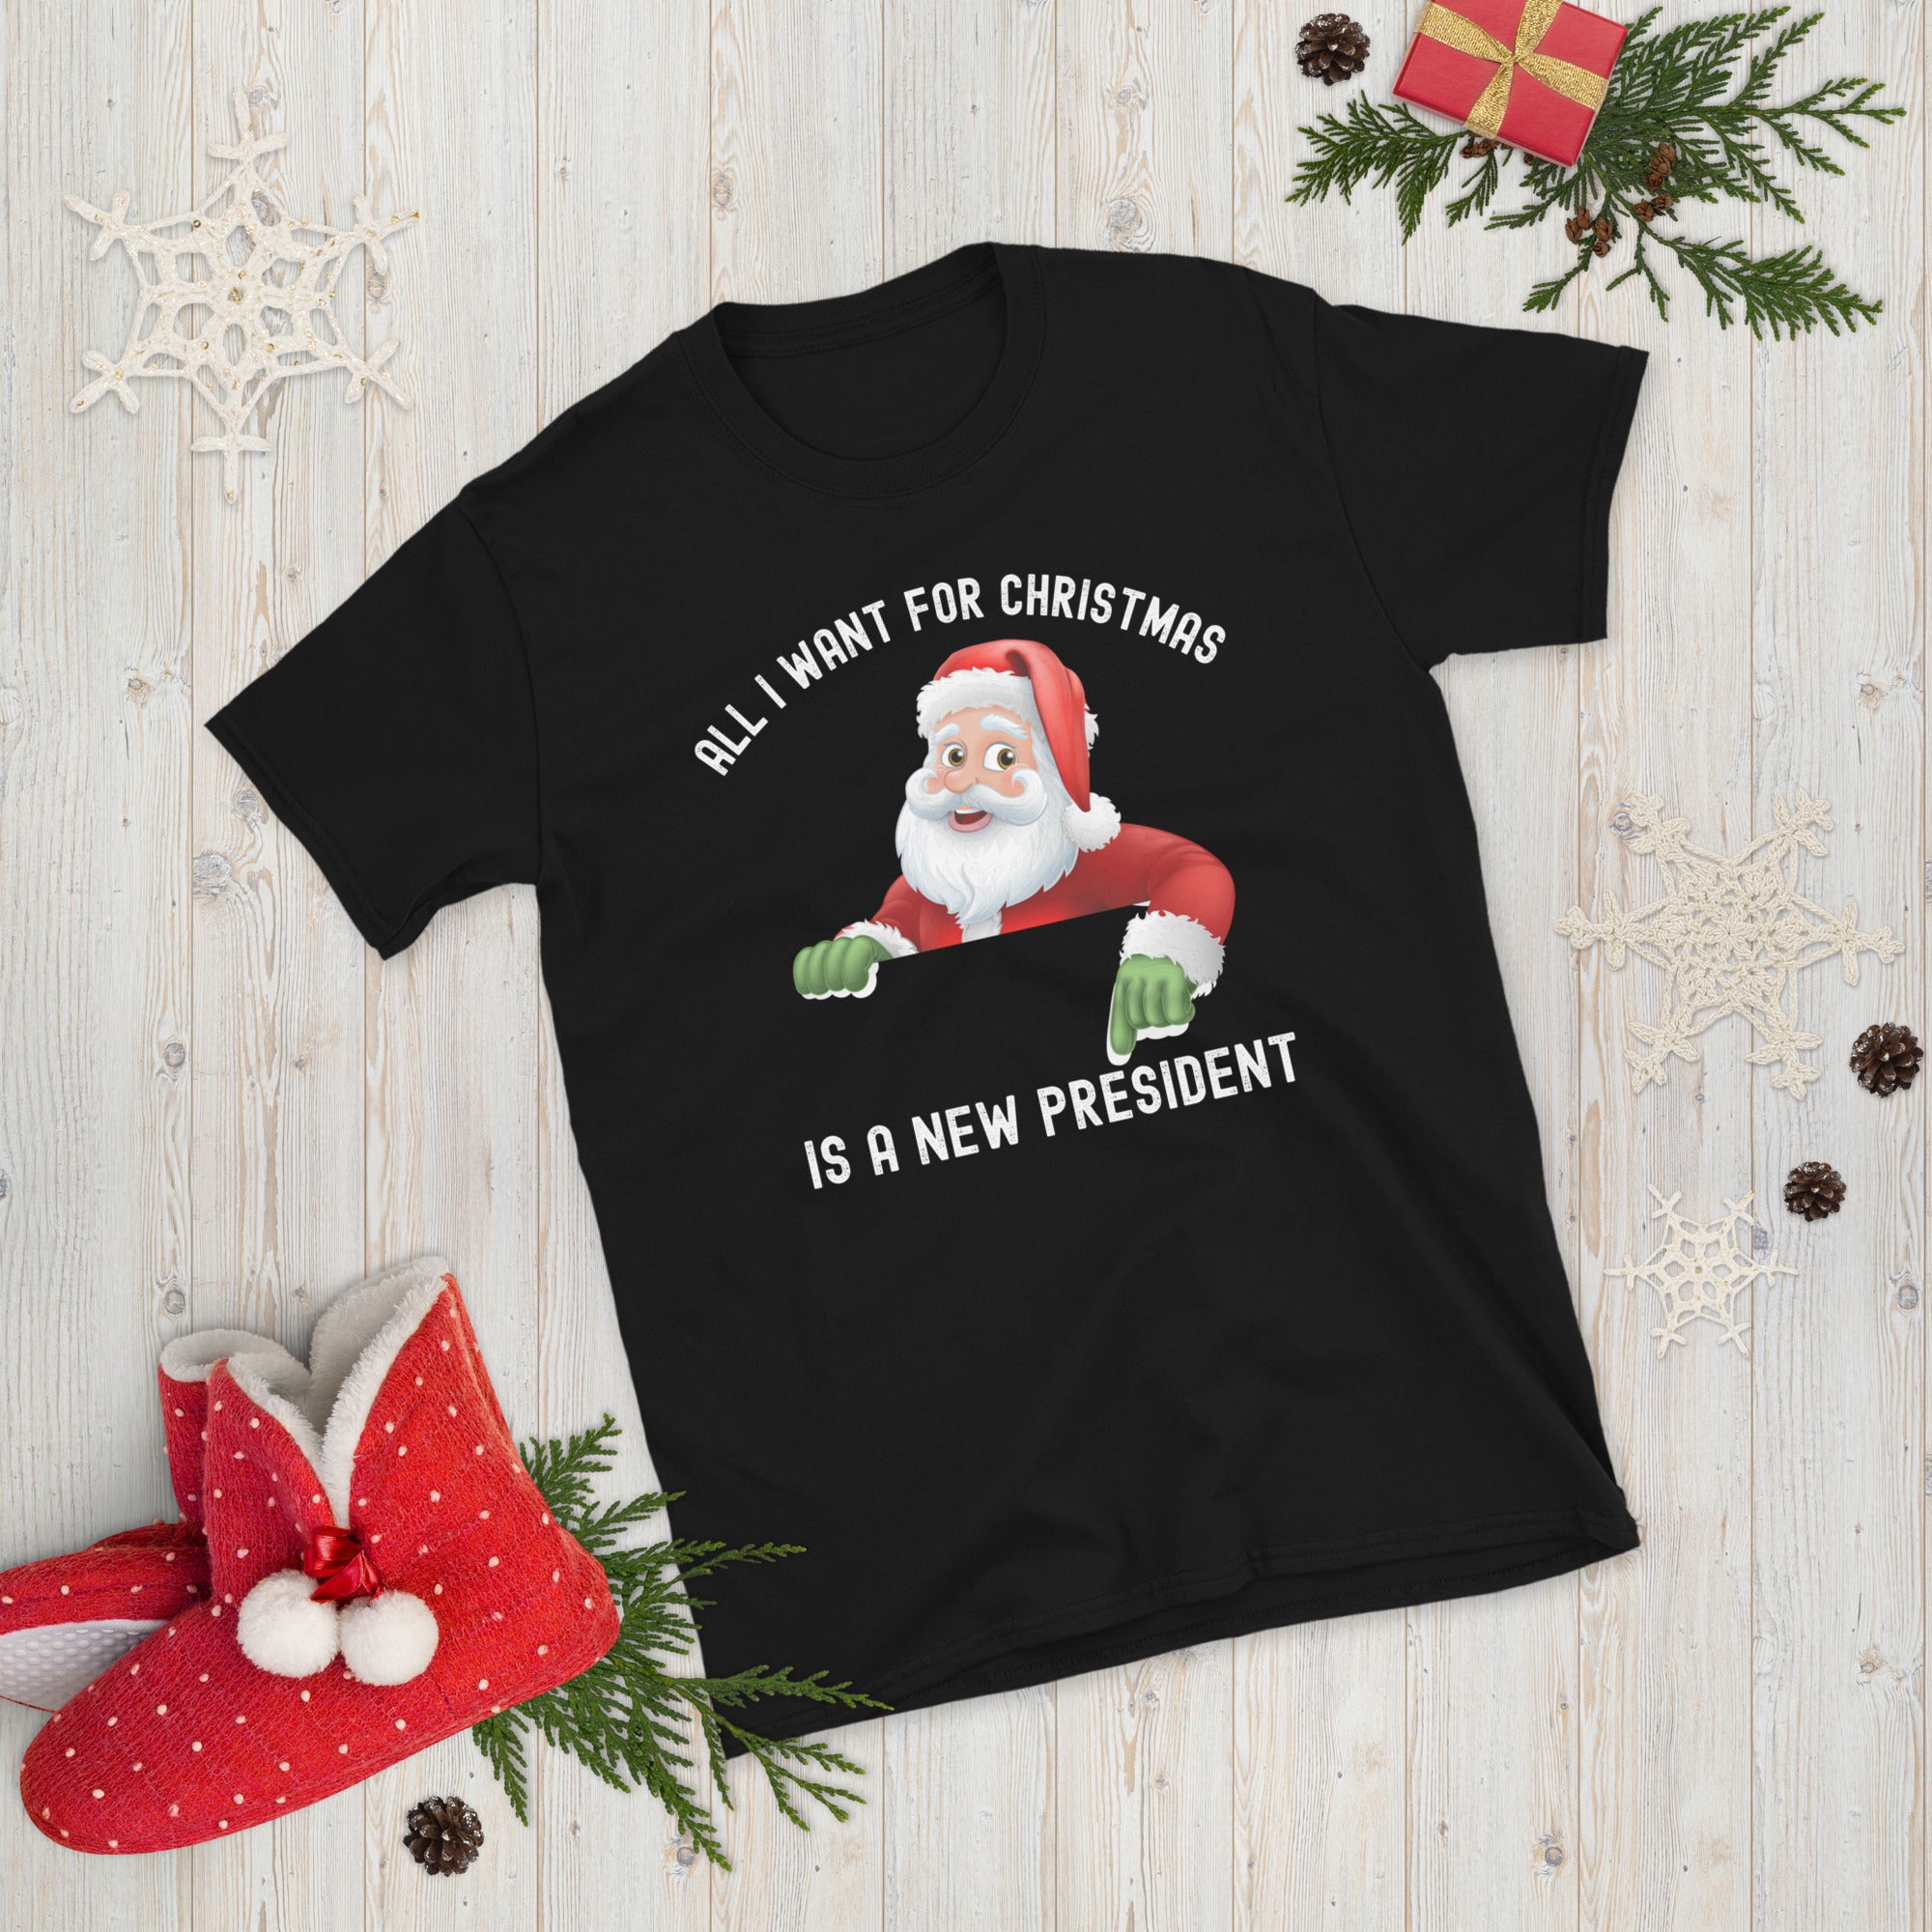 All I Want For Christmas Is A New President Funny Shirt, Republican Christmas, Xmas Conservative ΤShirt, Impeach Biden Tee, FJB Gift Shirt - Madeinsea©